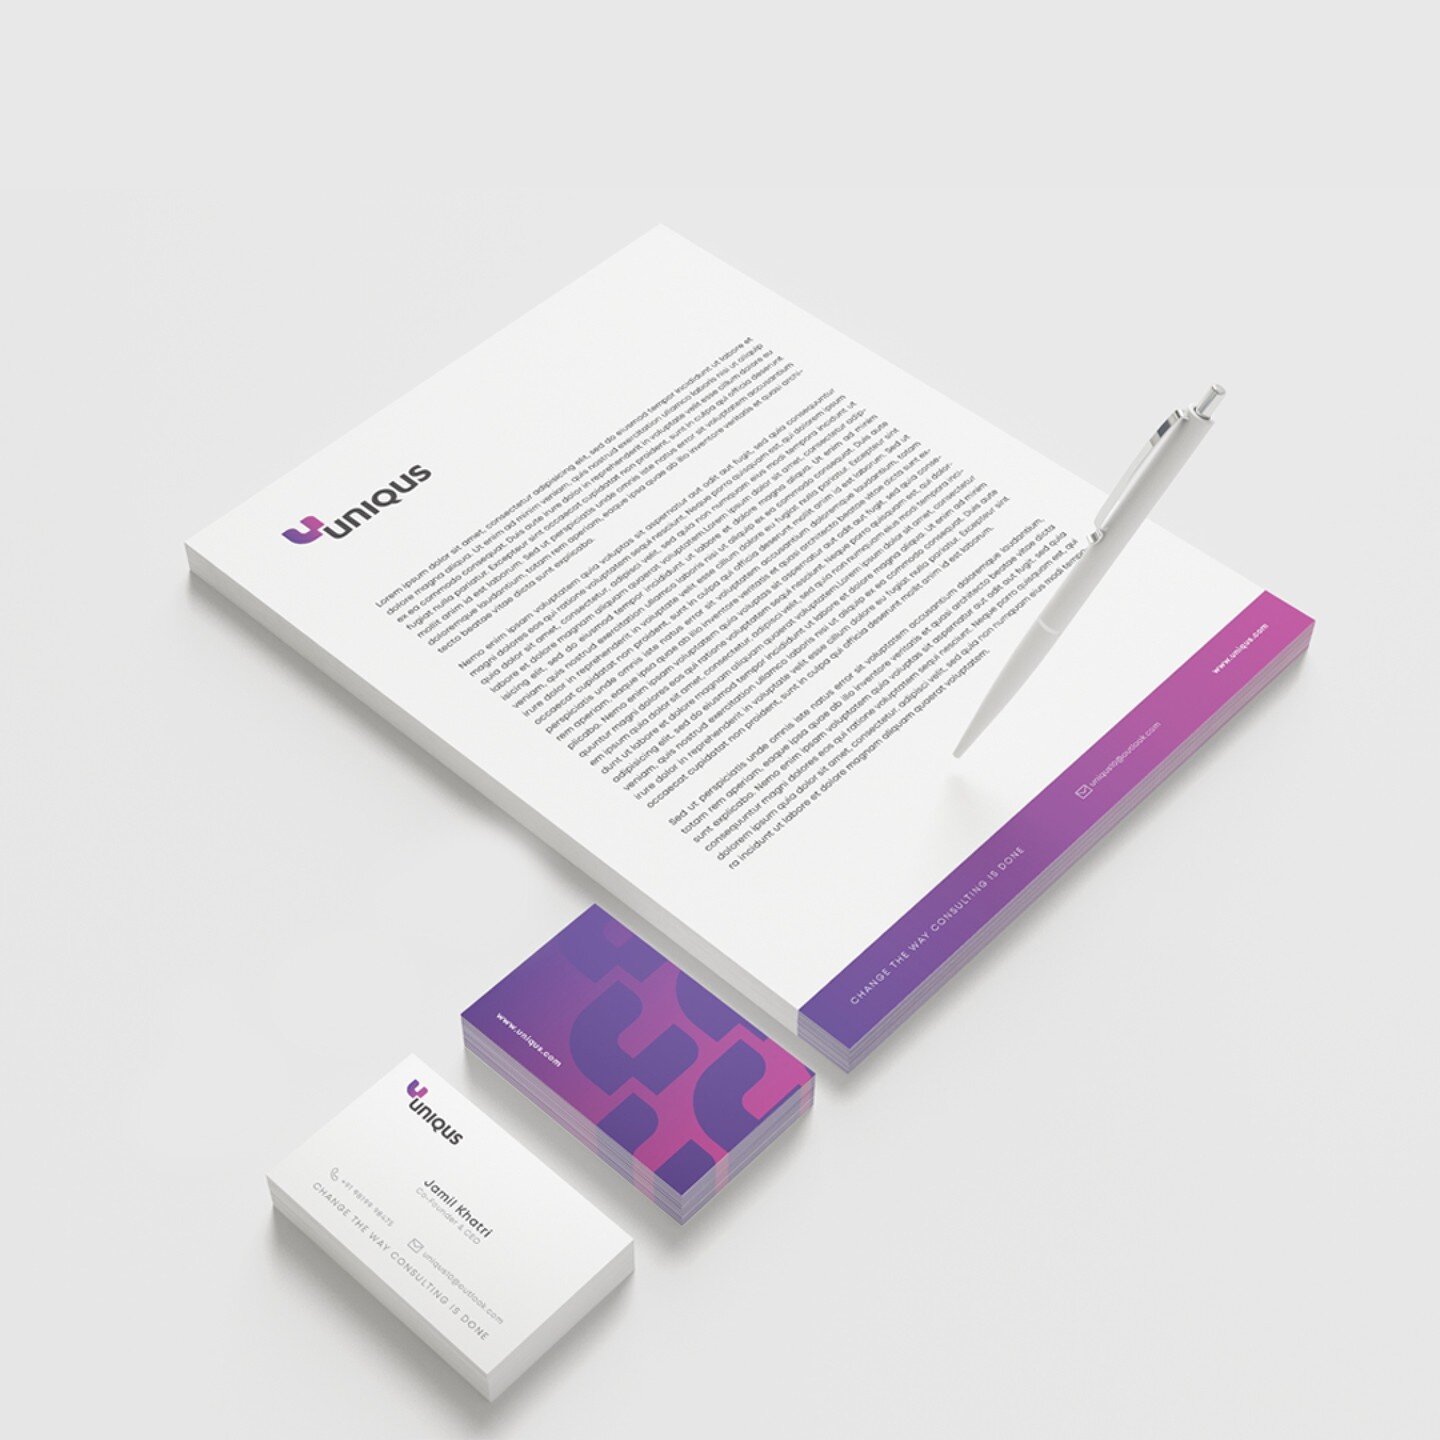 Corporate Stationery Design for Uniqus

The ever growing pattern along with the vibrant gradient create a strong recall value for the brand. Maintaining the visual language through the various collaterals consistently reinforces the brand image.

#br